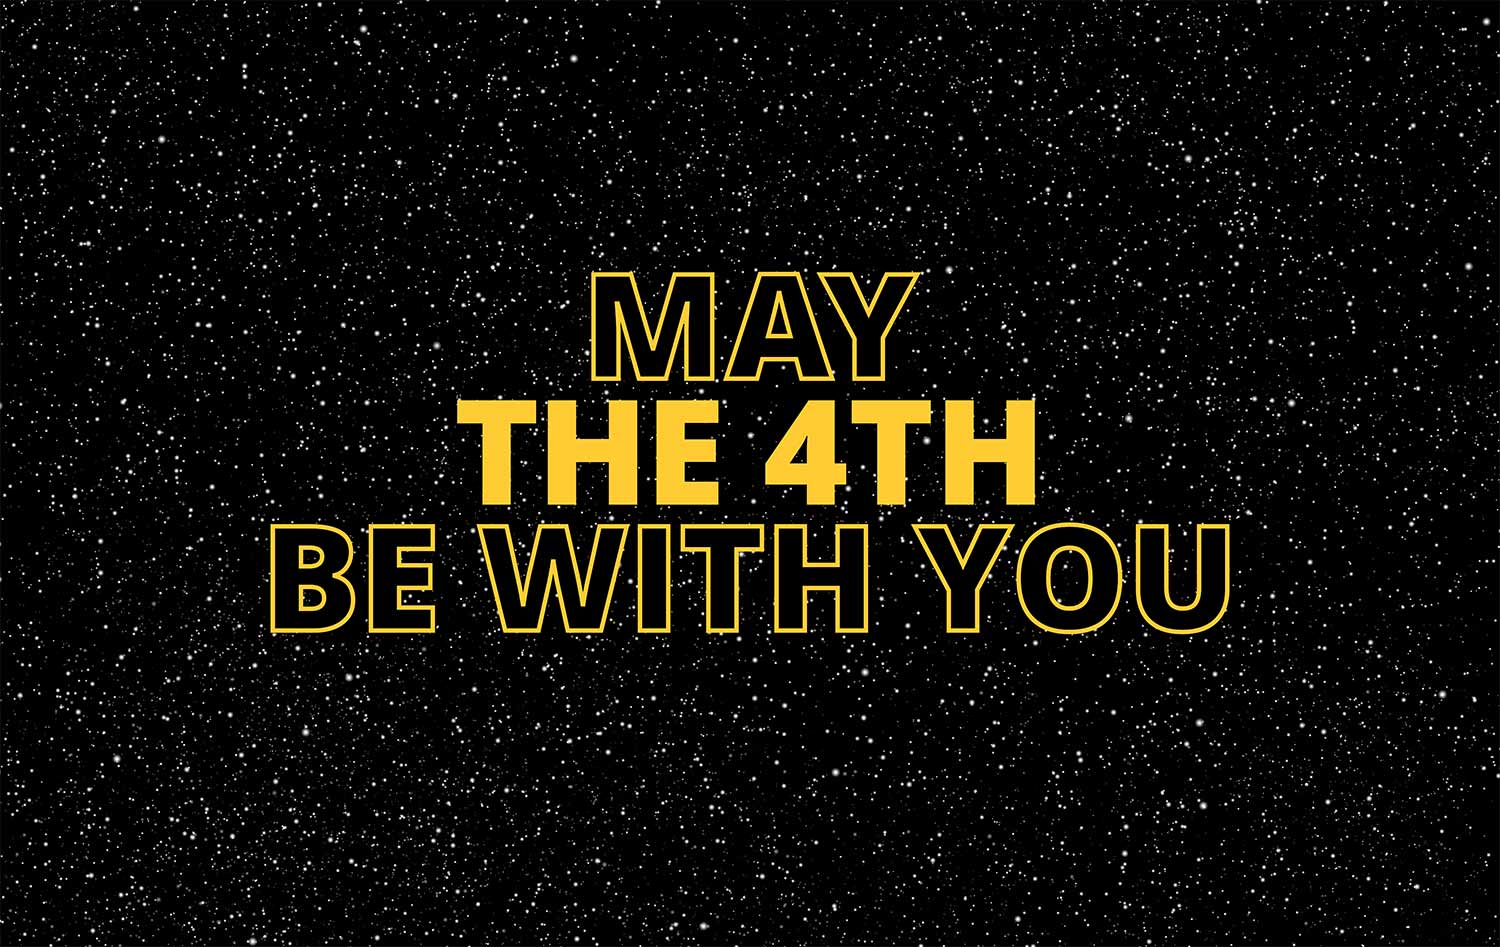 May the 4th be with you! Relevant Radio